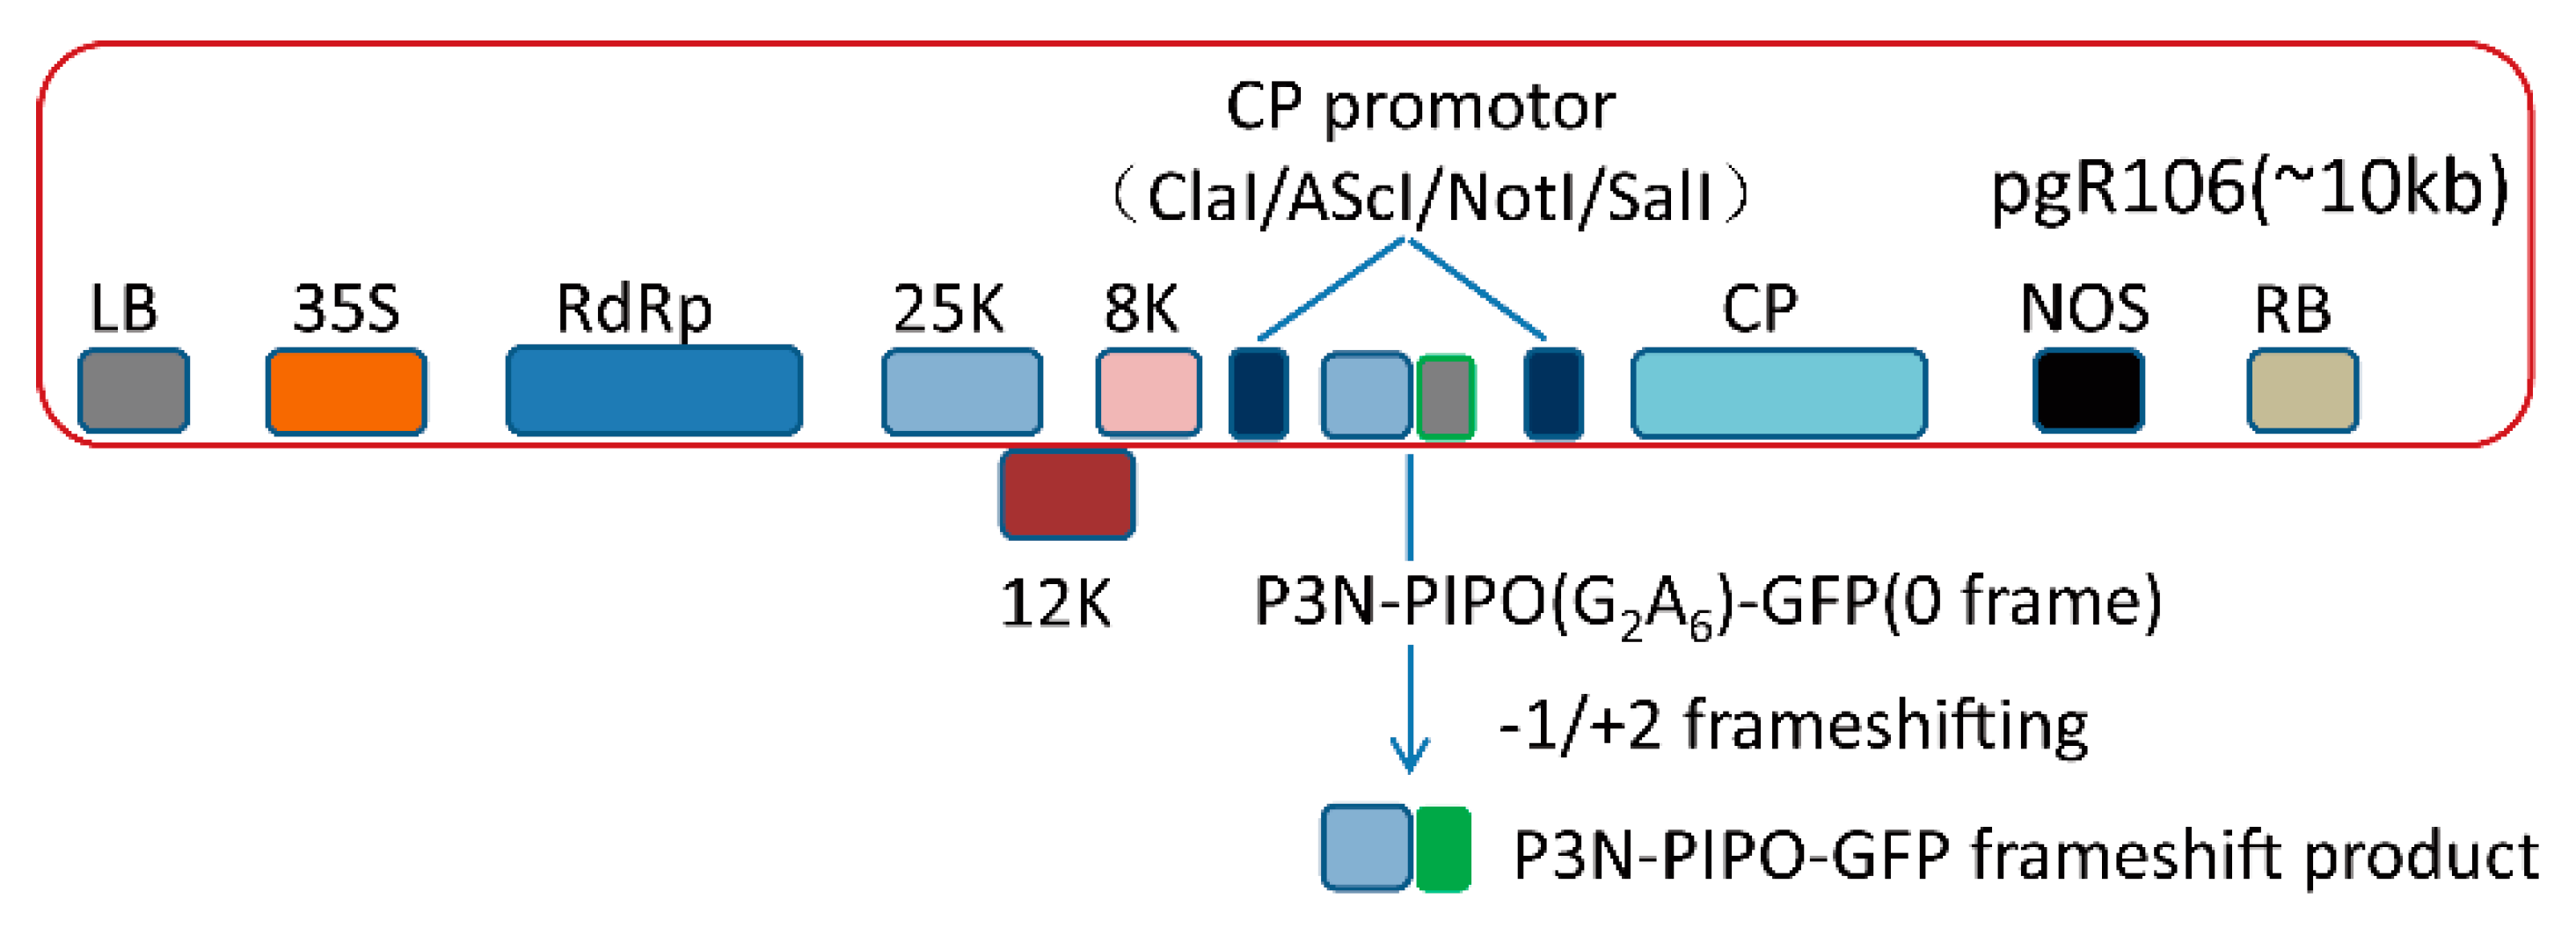 Viruses Free Full Text Integrated Proteomics And Transcriptomics Analyses Reveal The Transcriptional Slippage Of A Bymovirus P3n Pipo Gene Expressed From A Pvx Vector In Nicotiana Benthamiana Html